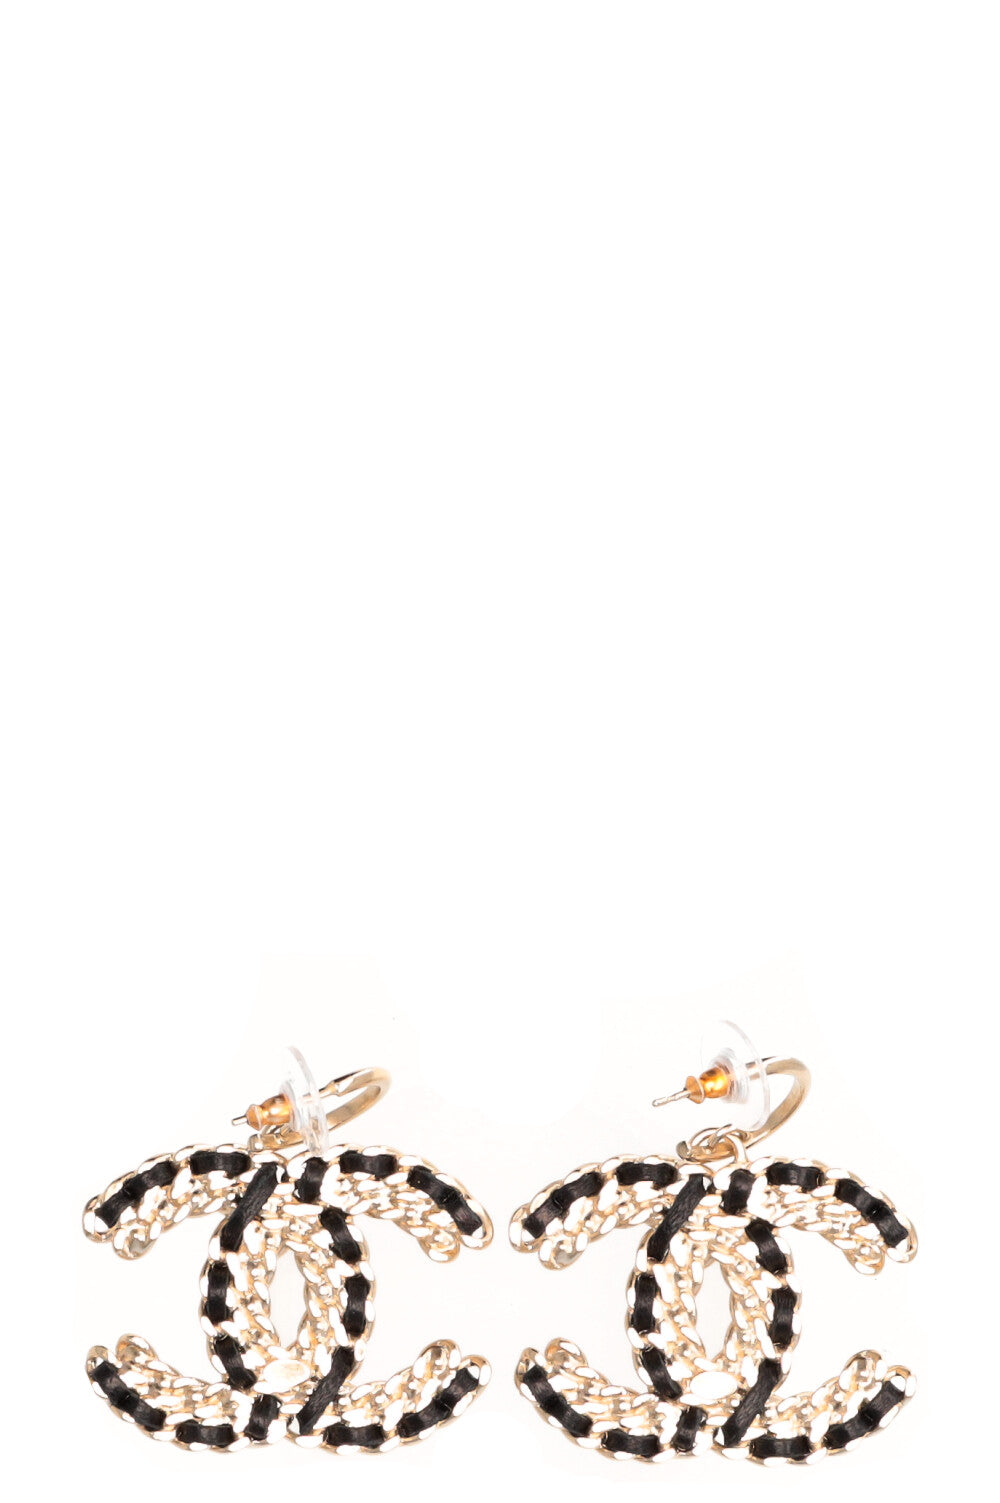 CHANEL CC Stud Earrings Silver Metal Black & Crystal Pre-Fall 2014 -  Chelsea Vintage Couture